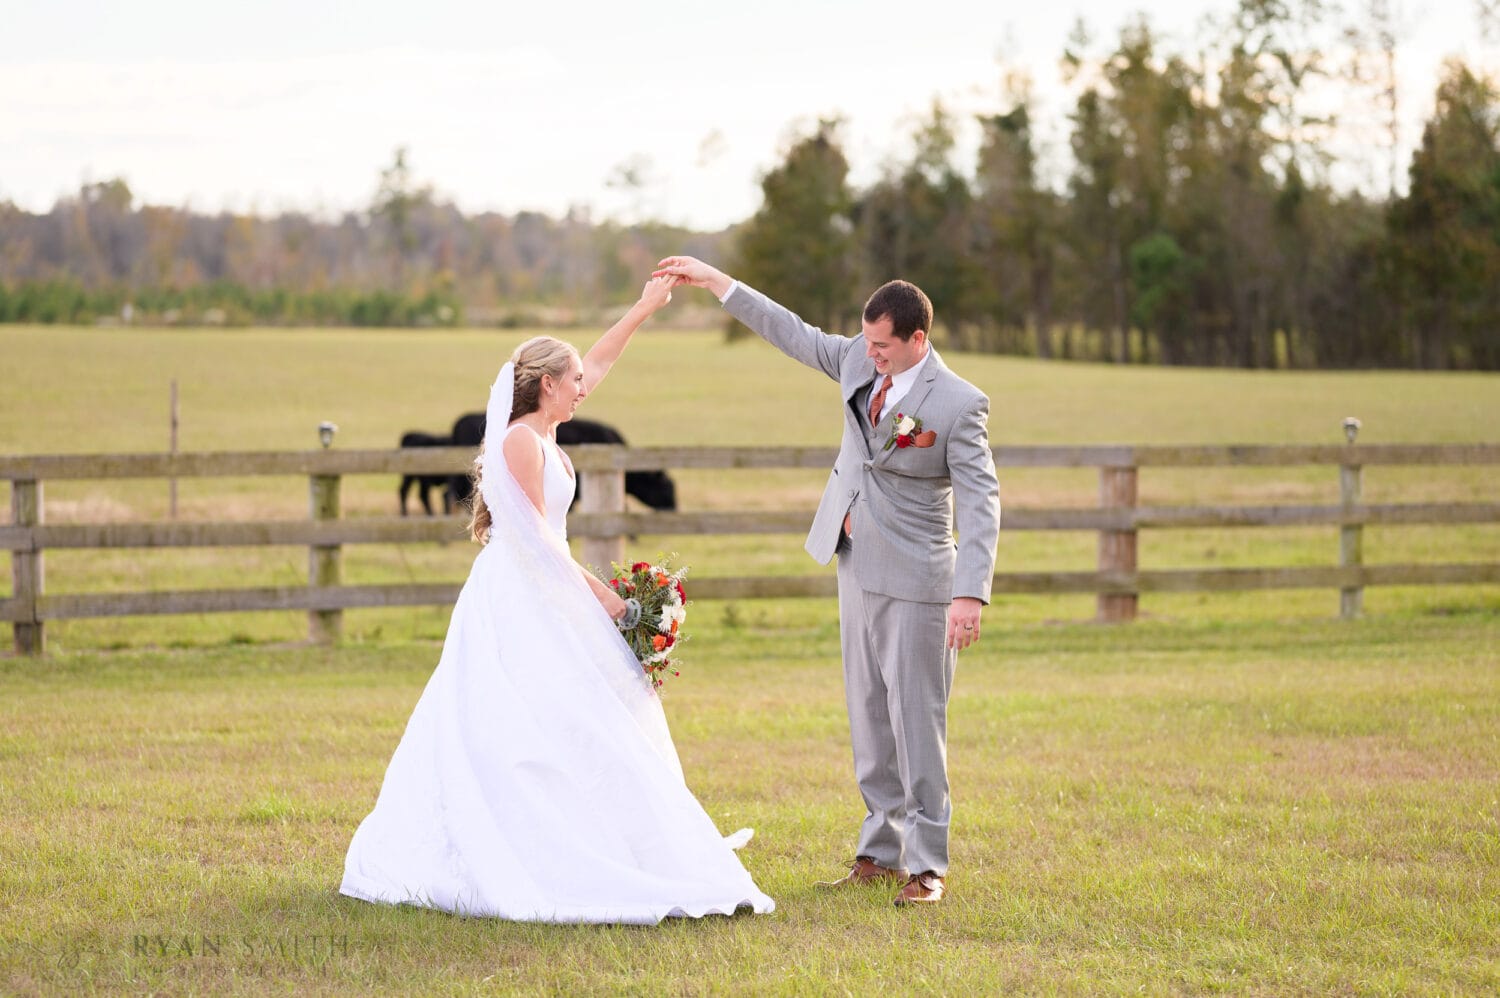 Groom spinning the bride - The Blessed Barn